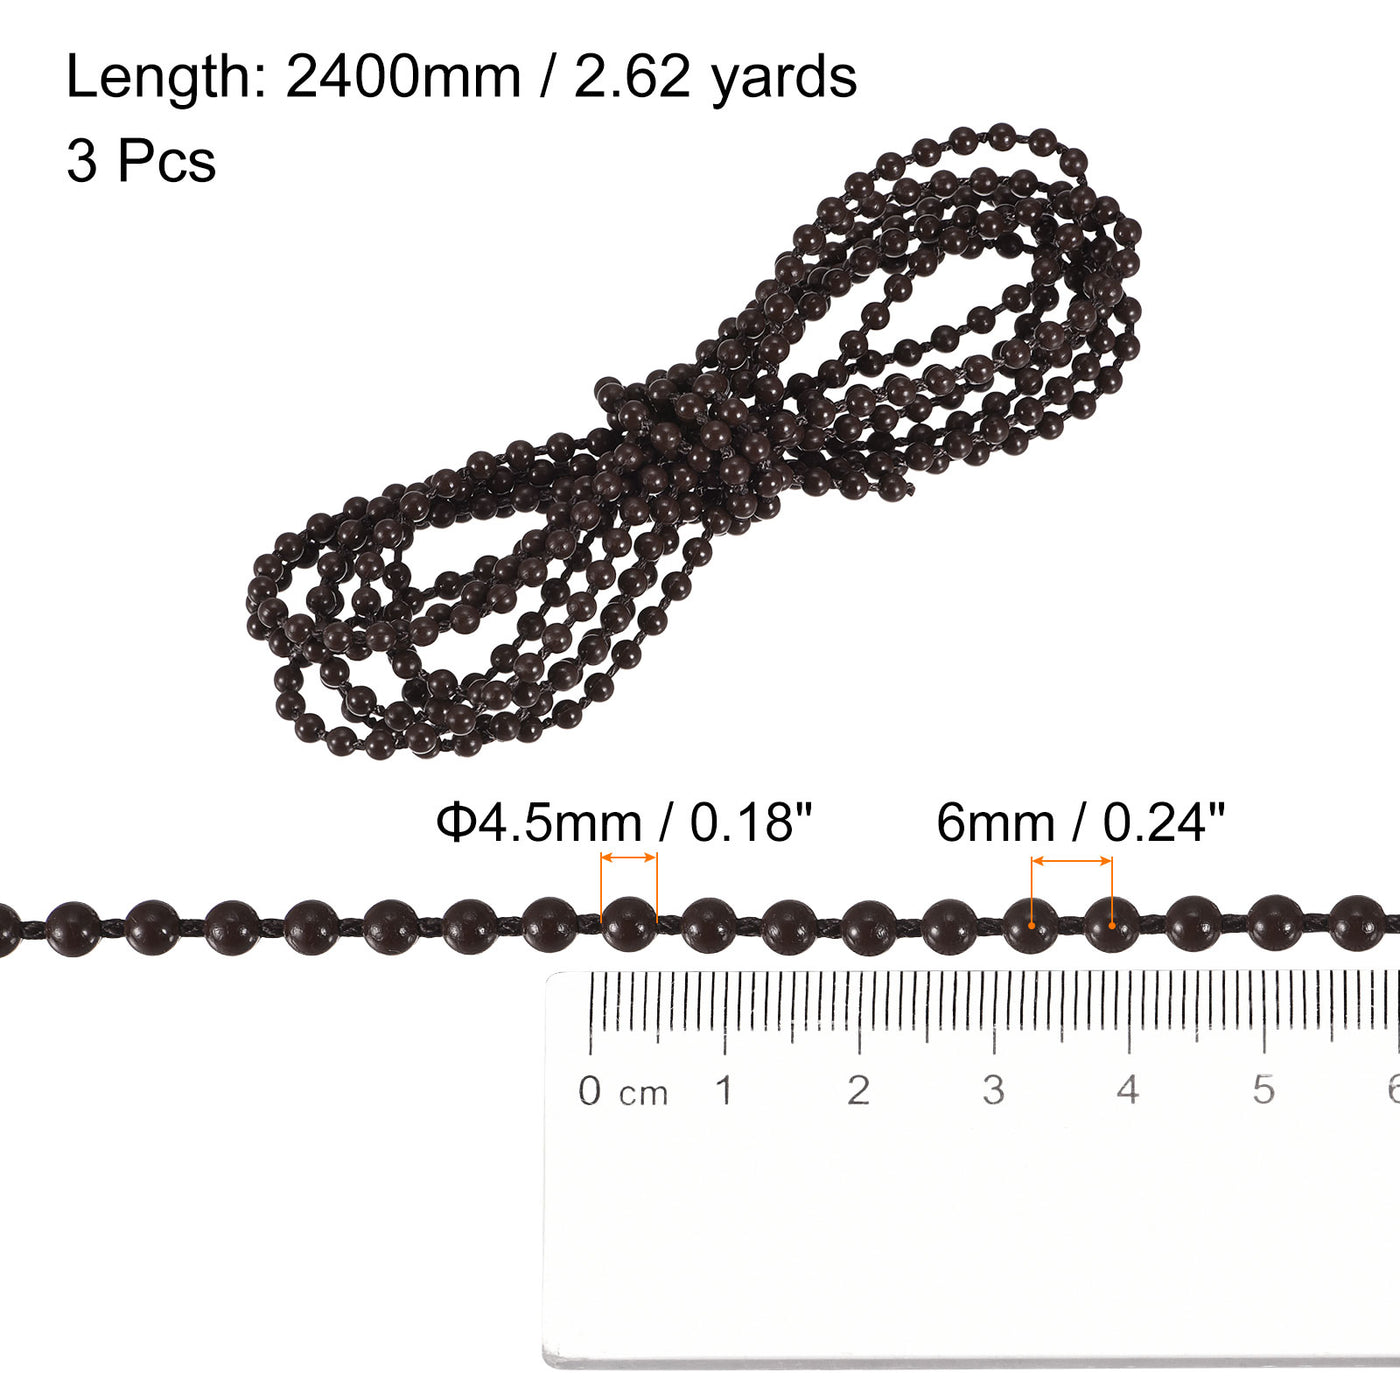 uxcell Uxcell 2.62 Yards Blinds Beaded Chain 3Pcs Roller Shade for Window Repair Parts, Coffee